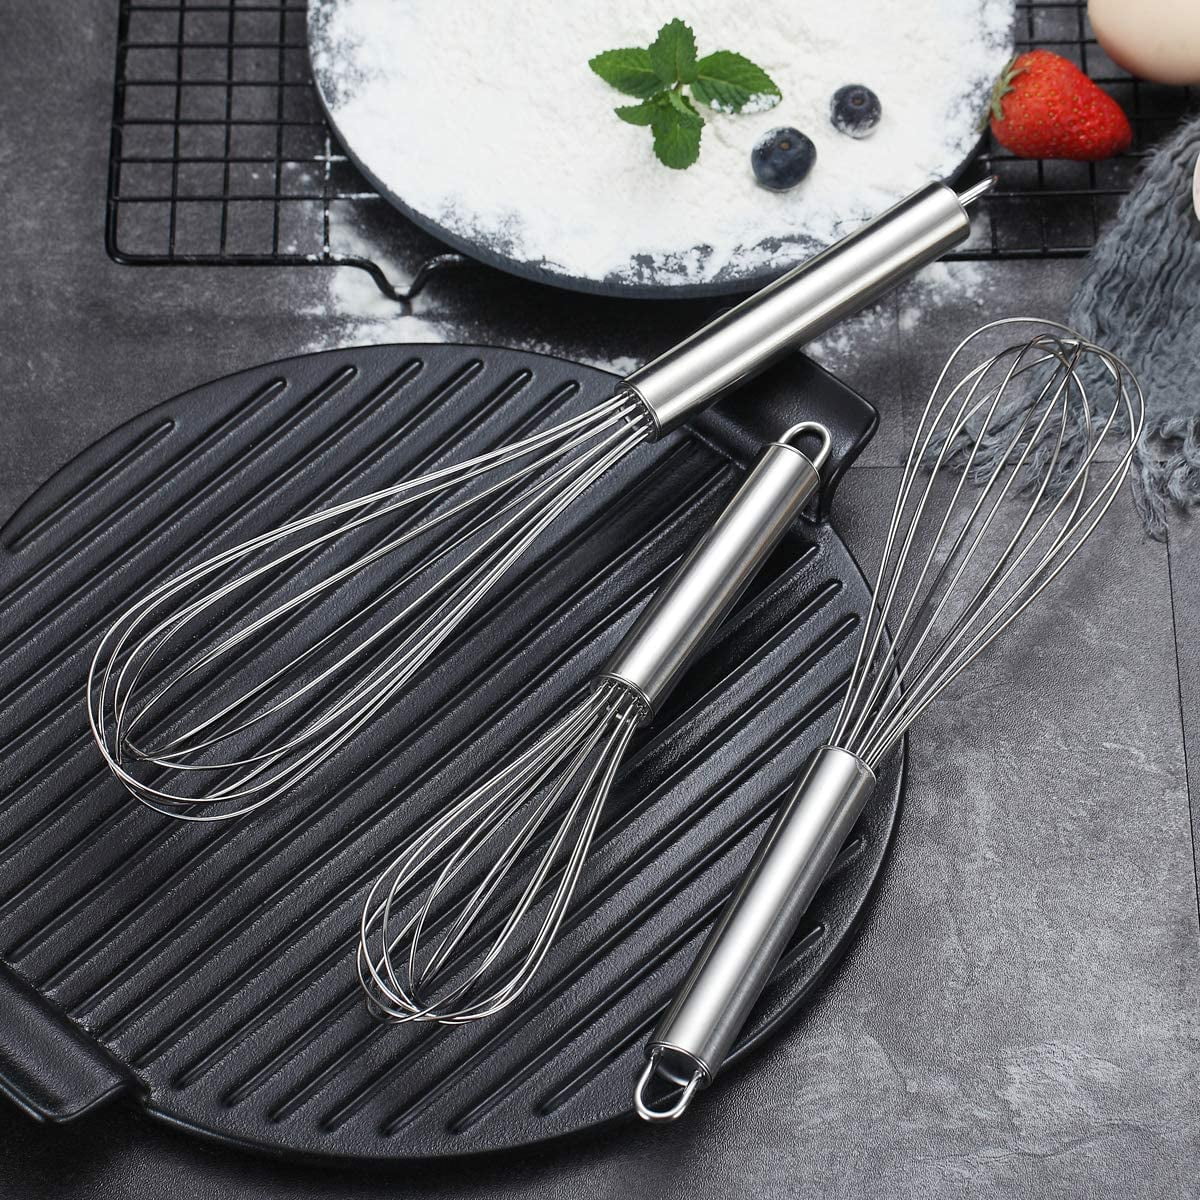 KABOER Stainless Steel Whisks 8 10 12, Wire Whisk Set Kitchen wisks for  Cooking, Blending, Whisking, Beating, Stirring 